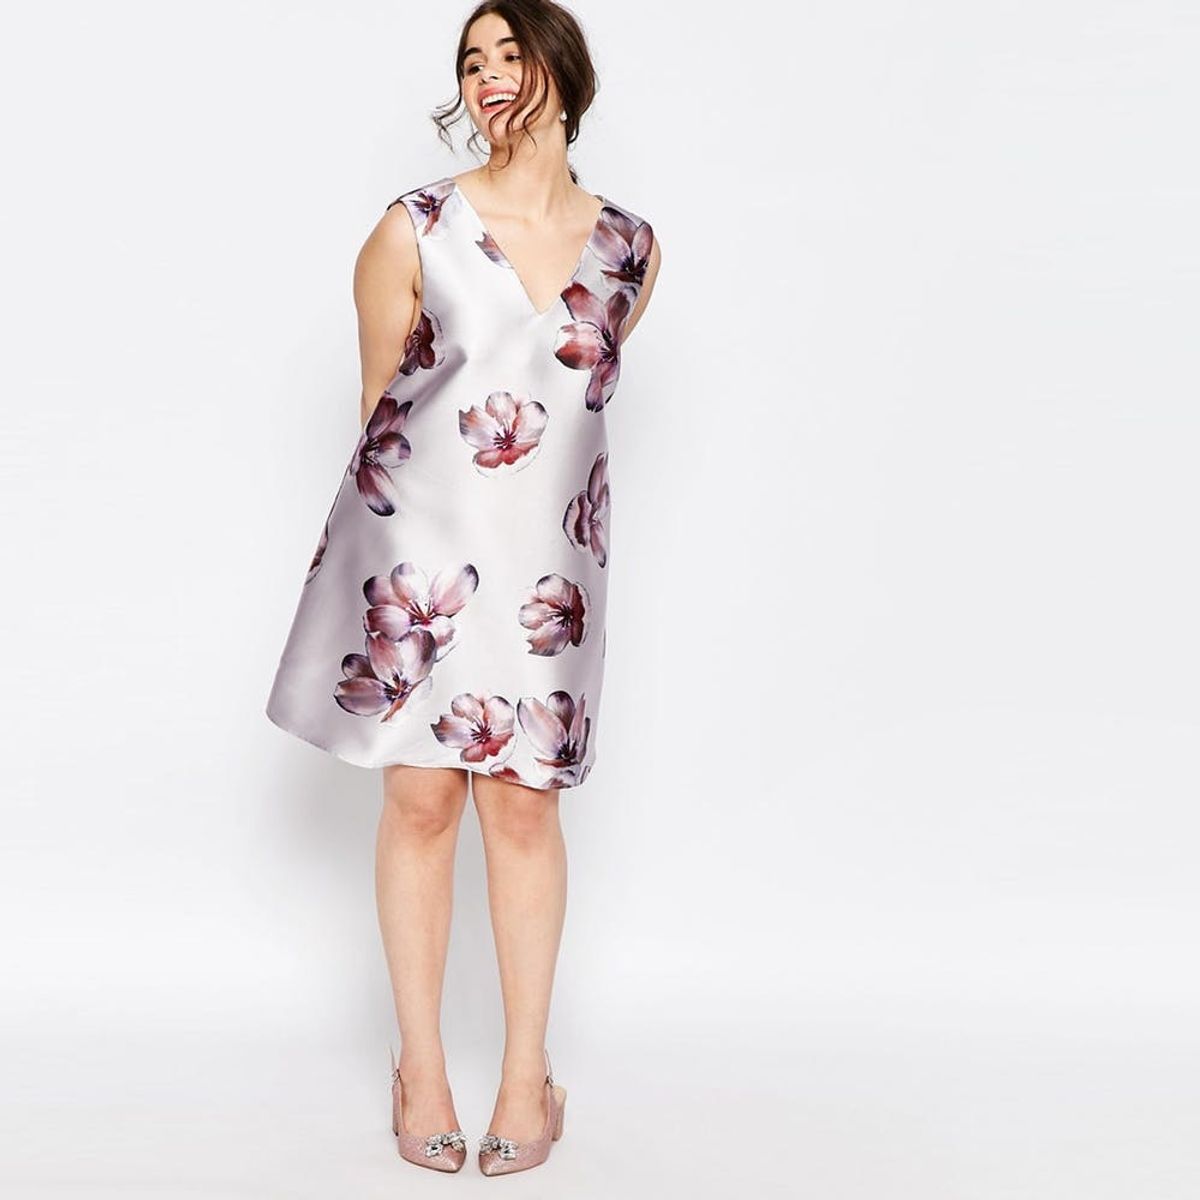 15 Dresses to Wear to Every Spring Wedding